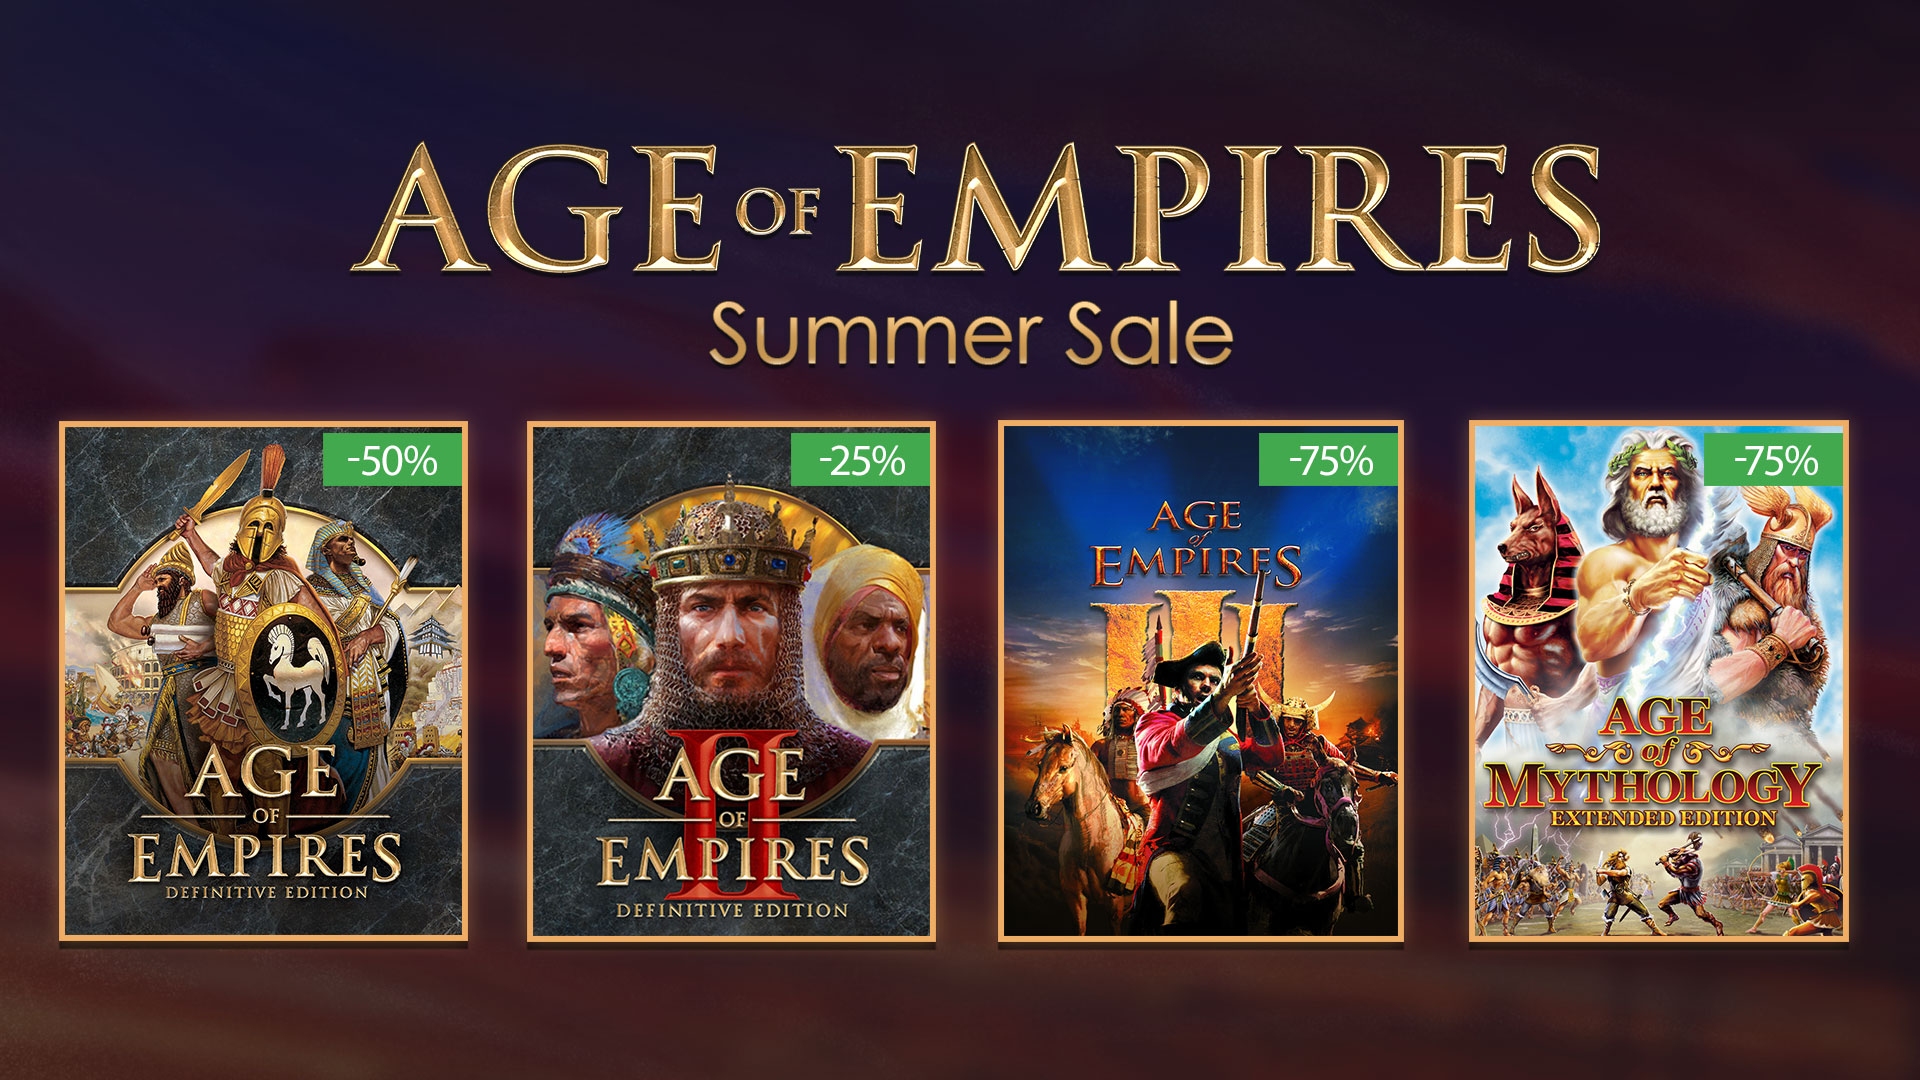 steam age of empires trial